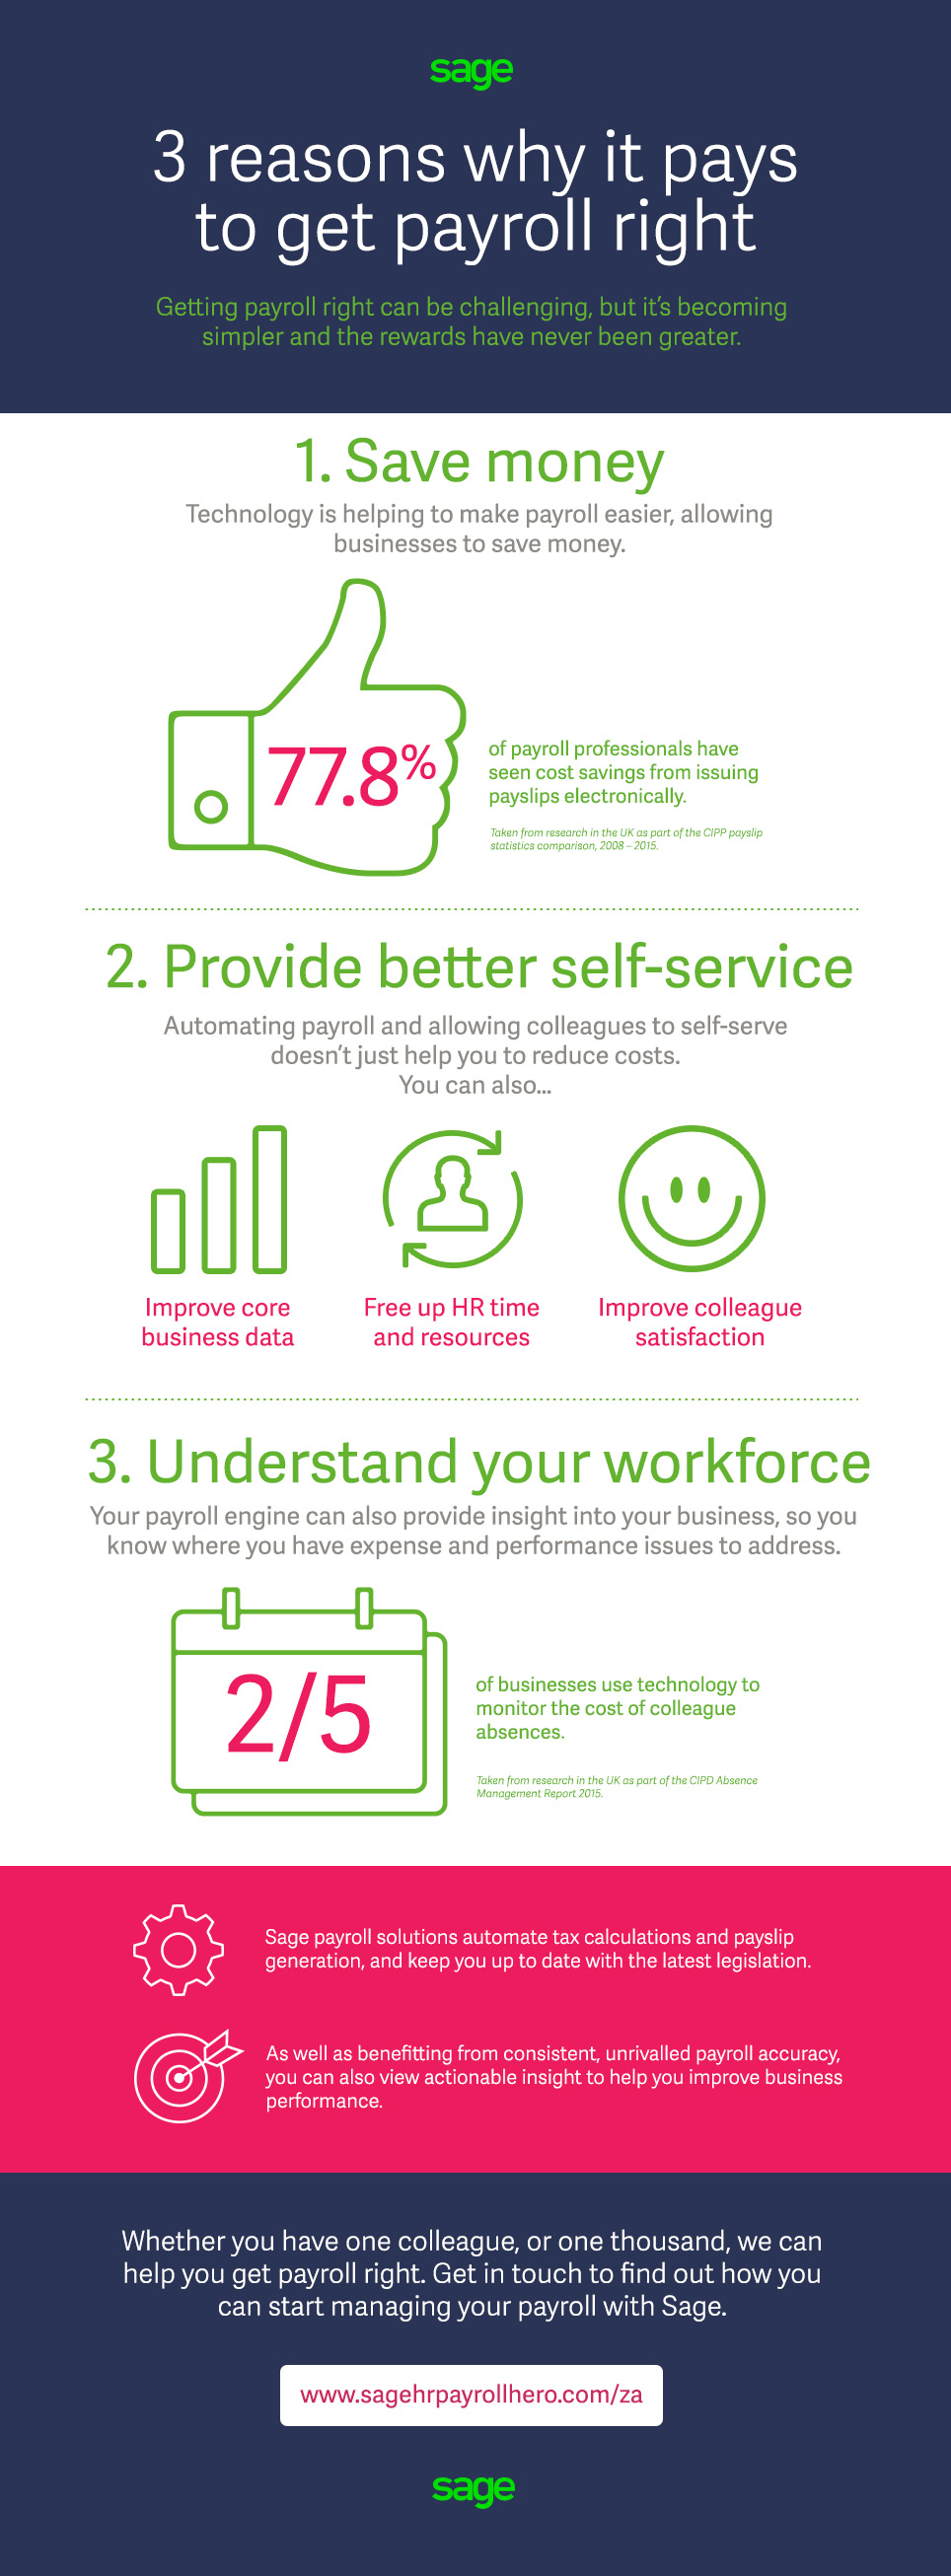 Infographic: 3 reasons why it pays to get payroll right